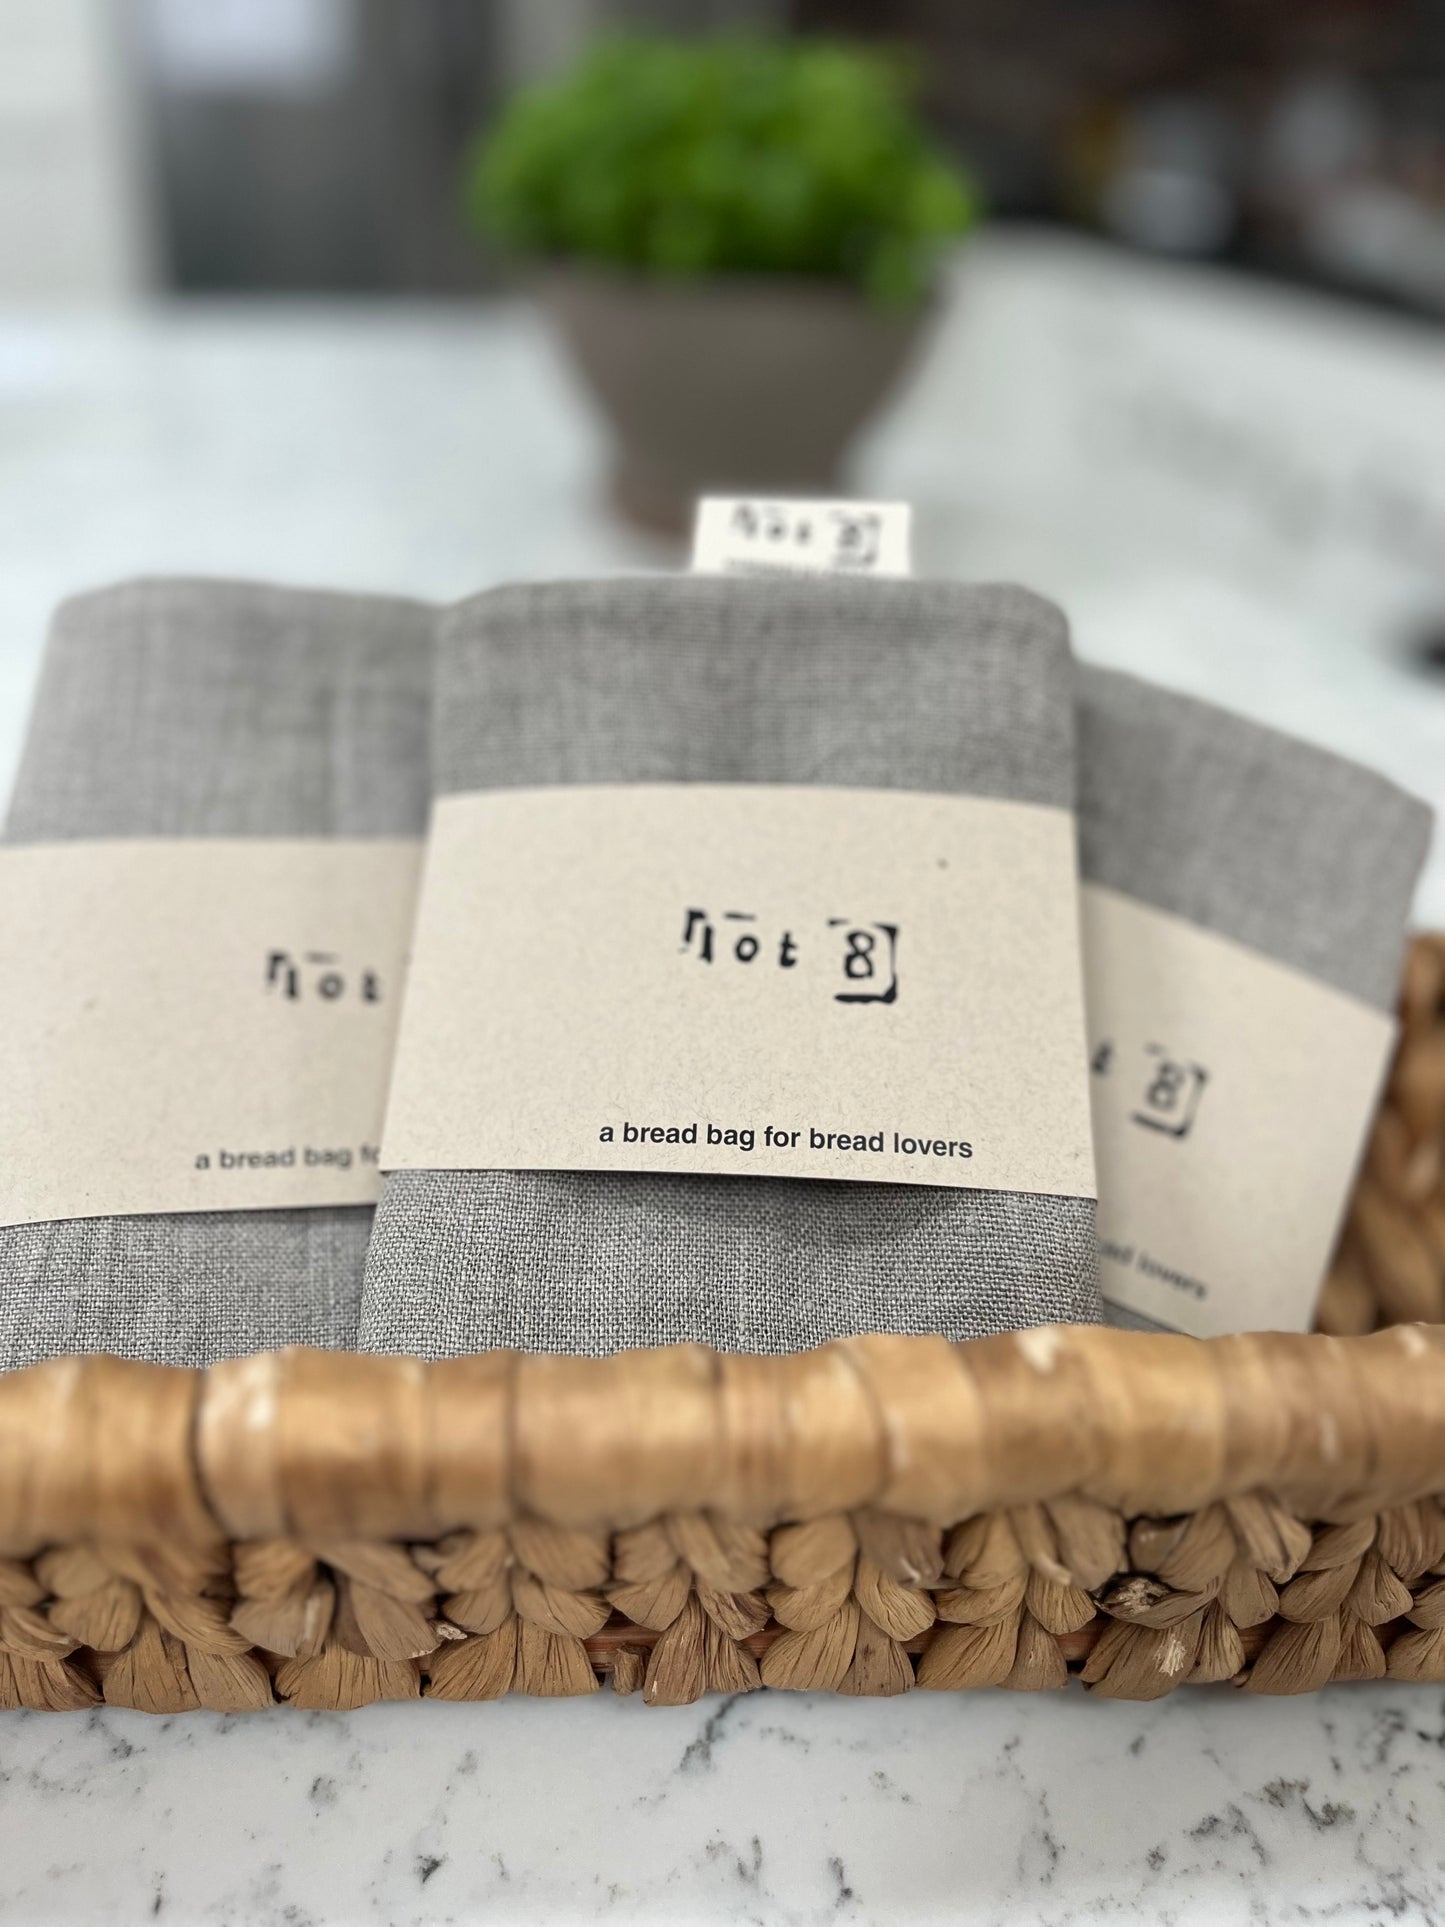 3 linen bread bags are nestled in a woven basket (not included). Each is wrapped in a lot8 kraft paper belly band with 'a bread bag for bread lovers ' printed on the front.A pot of basil is blurred in the background.